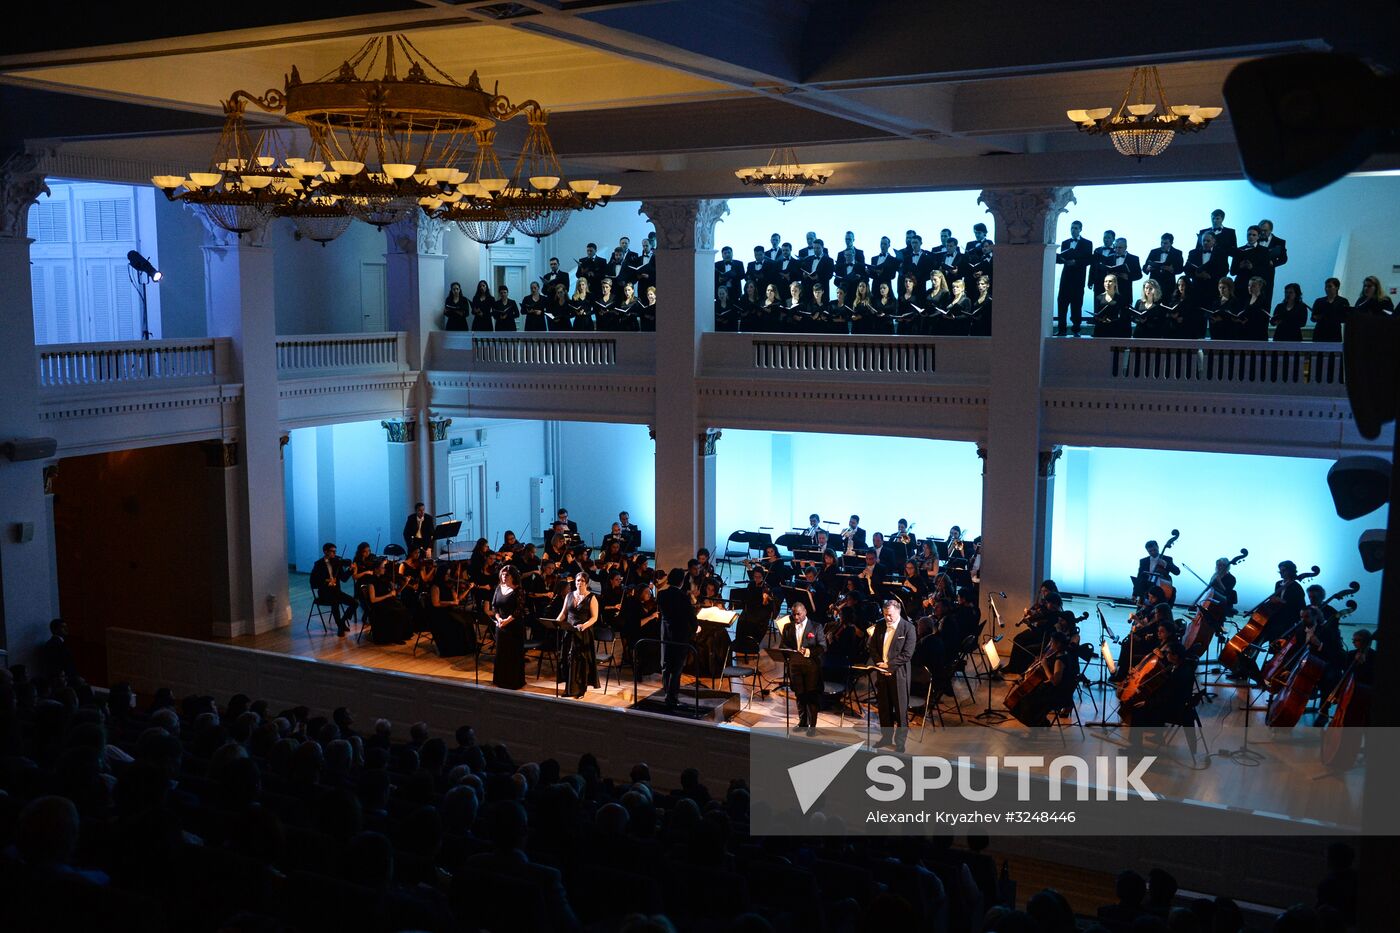 Novosibirsk Opera re-opens Small Stage after renovation